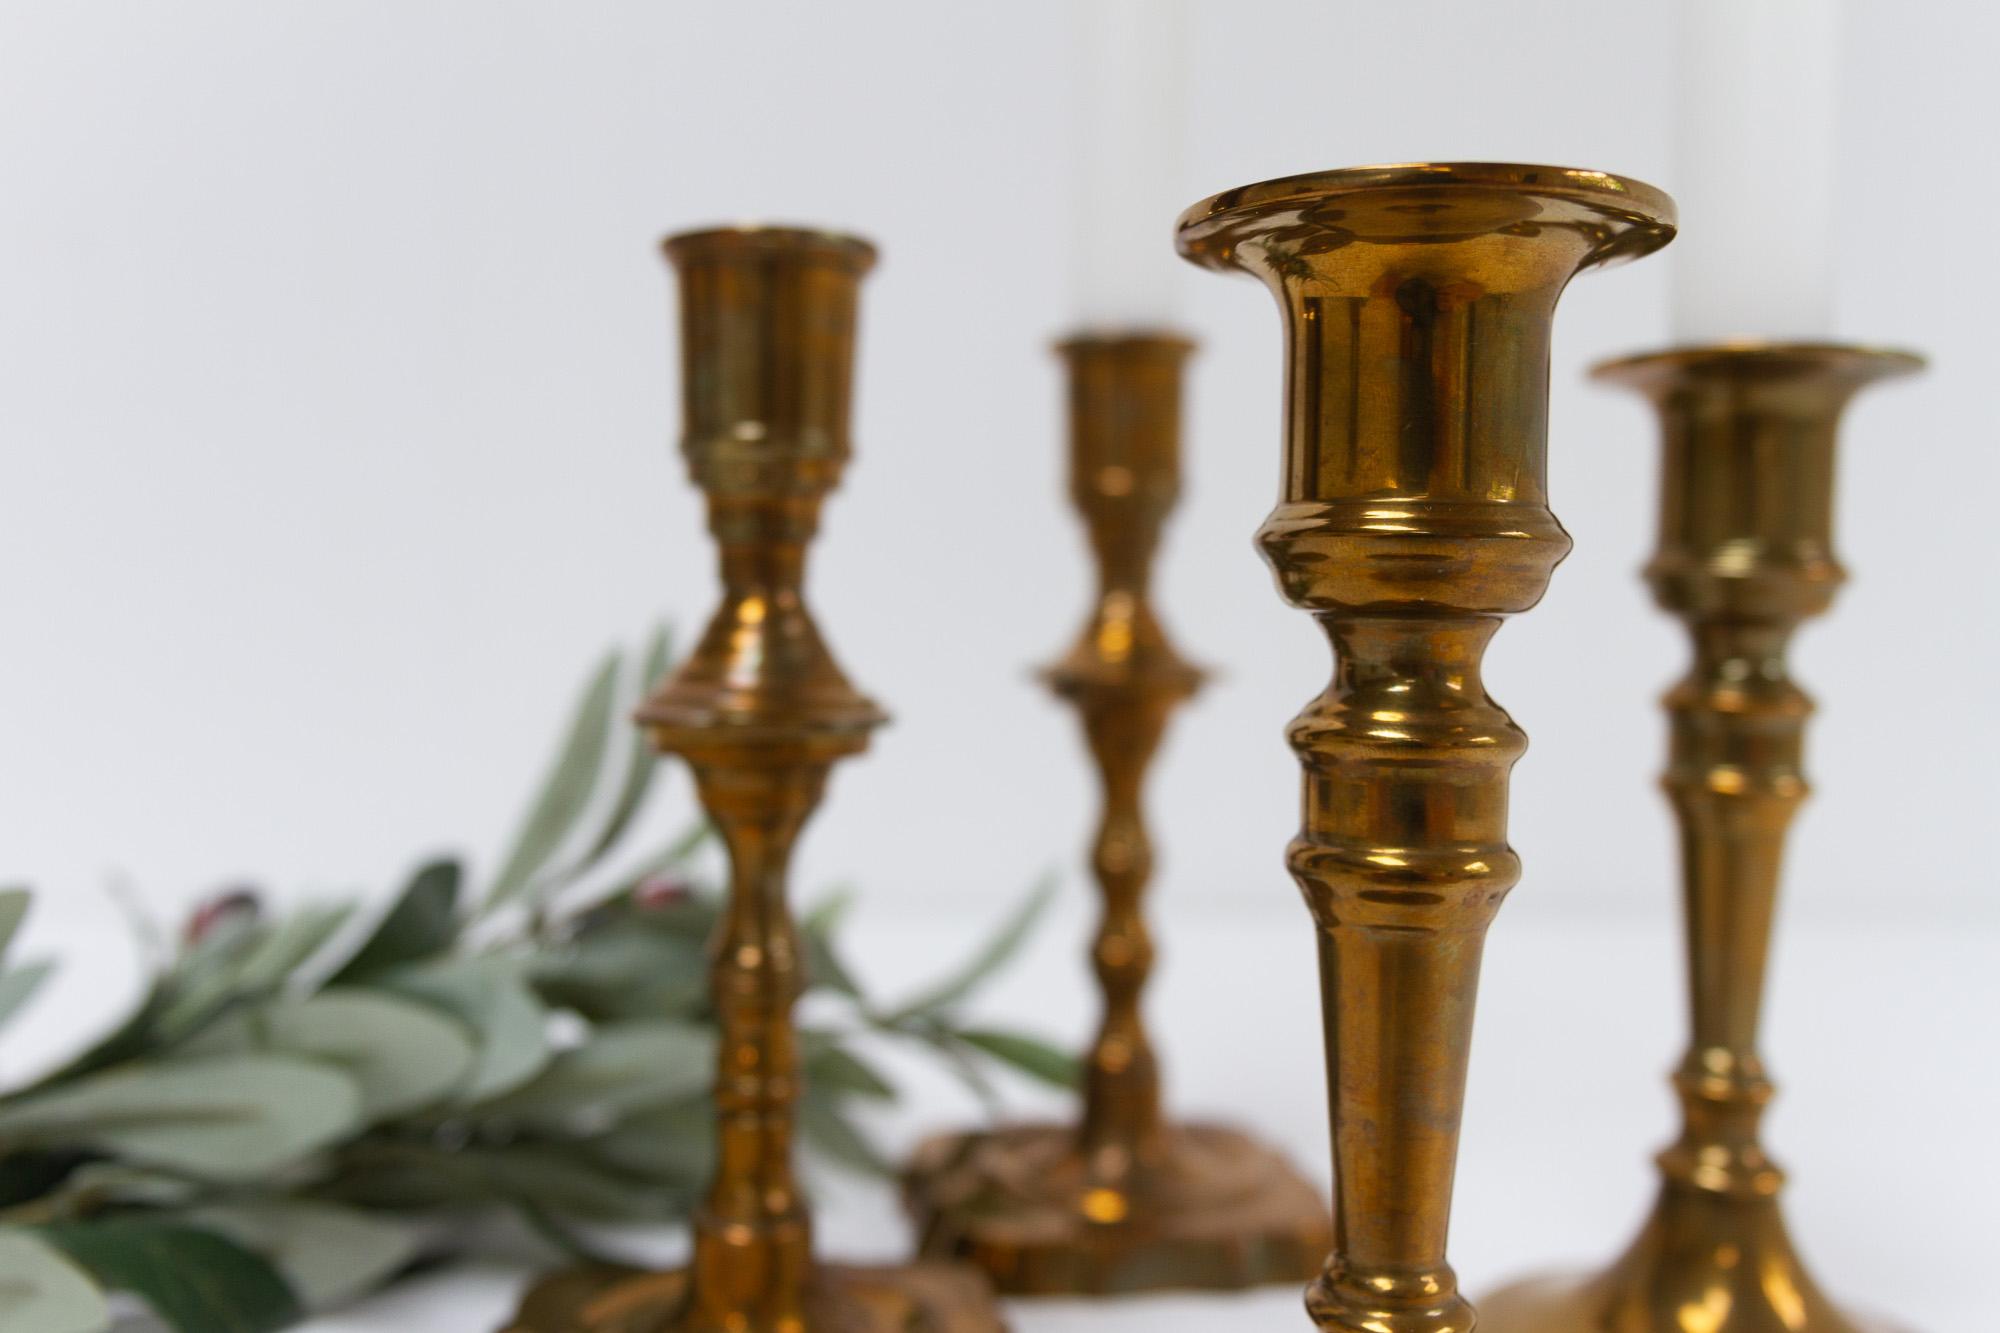 Vintage Danish Malm Candle Holders, 1950s. Set of 4. For Sale 3